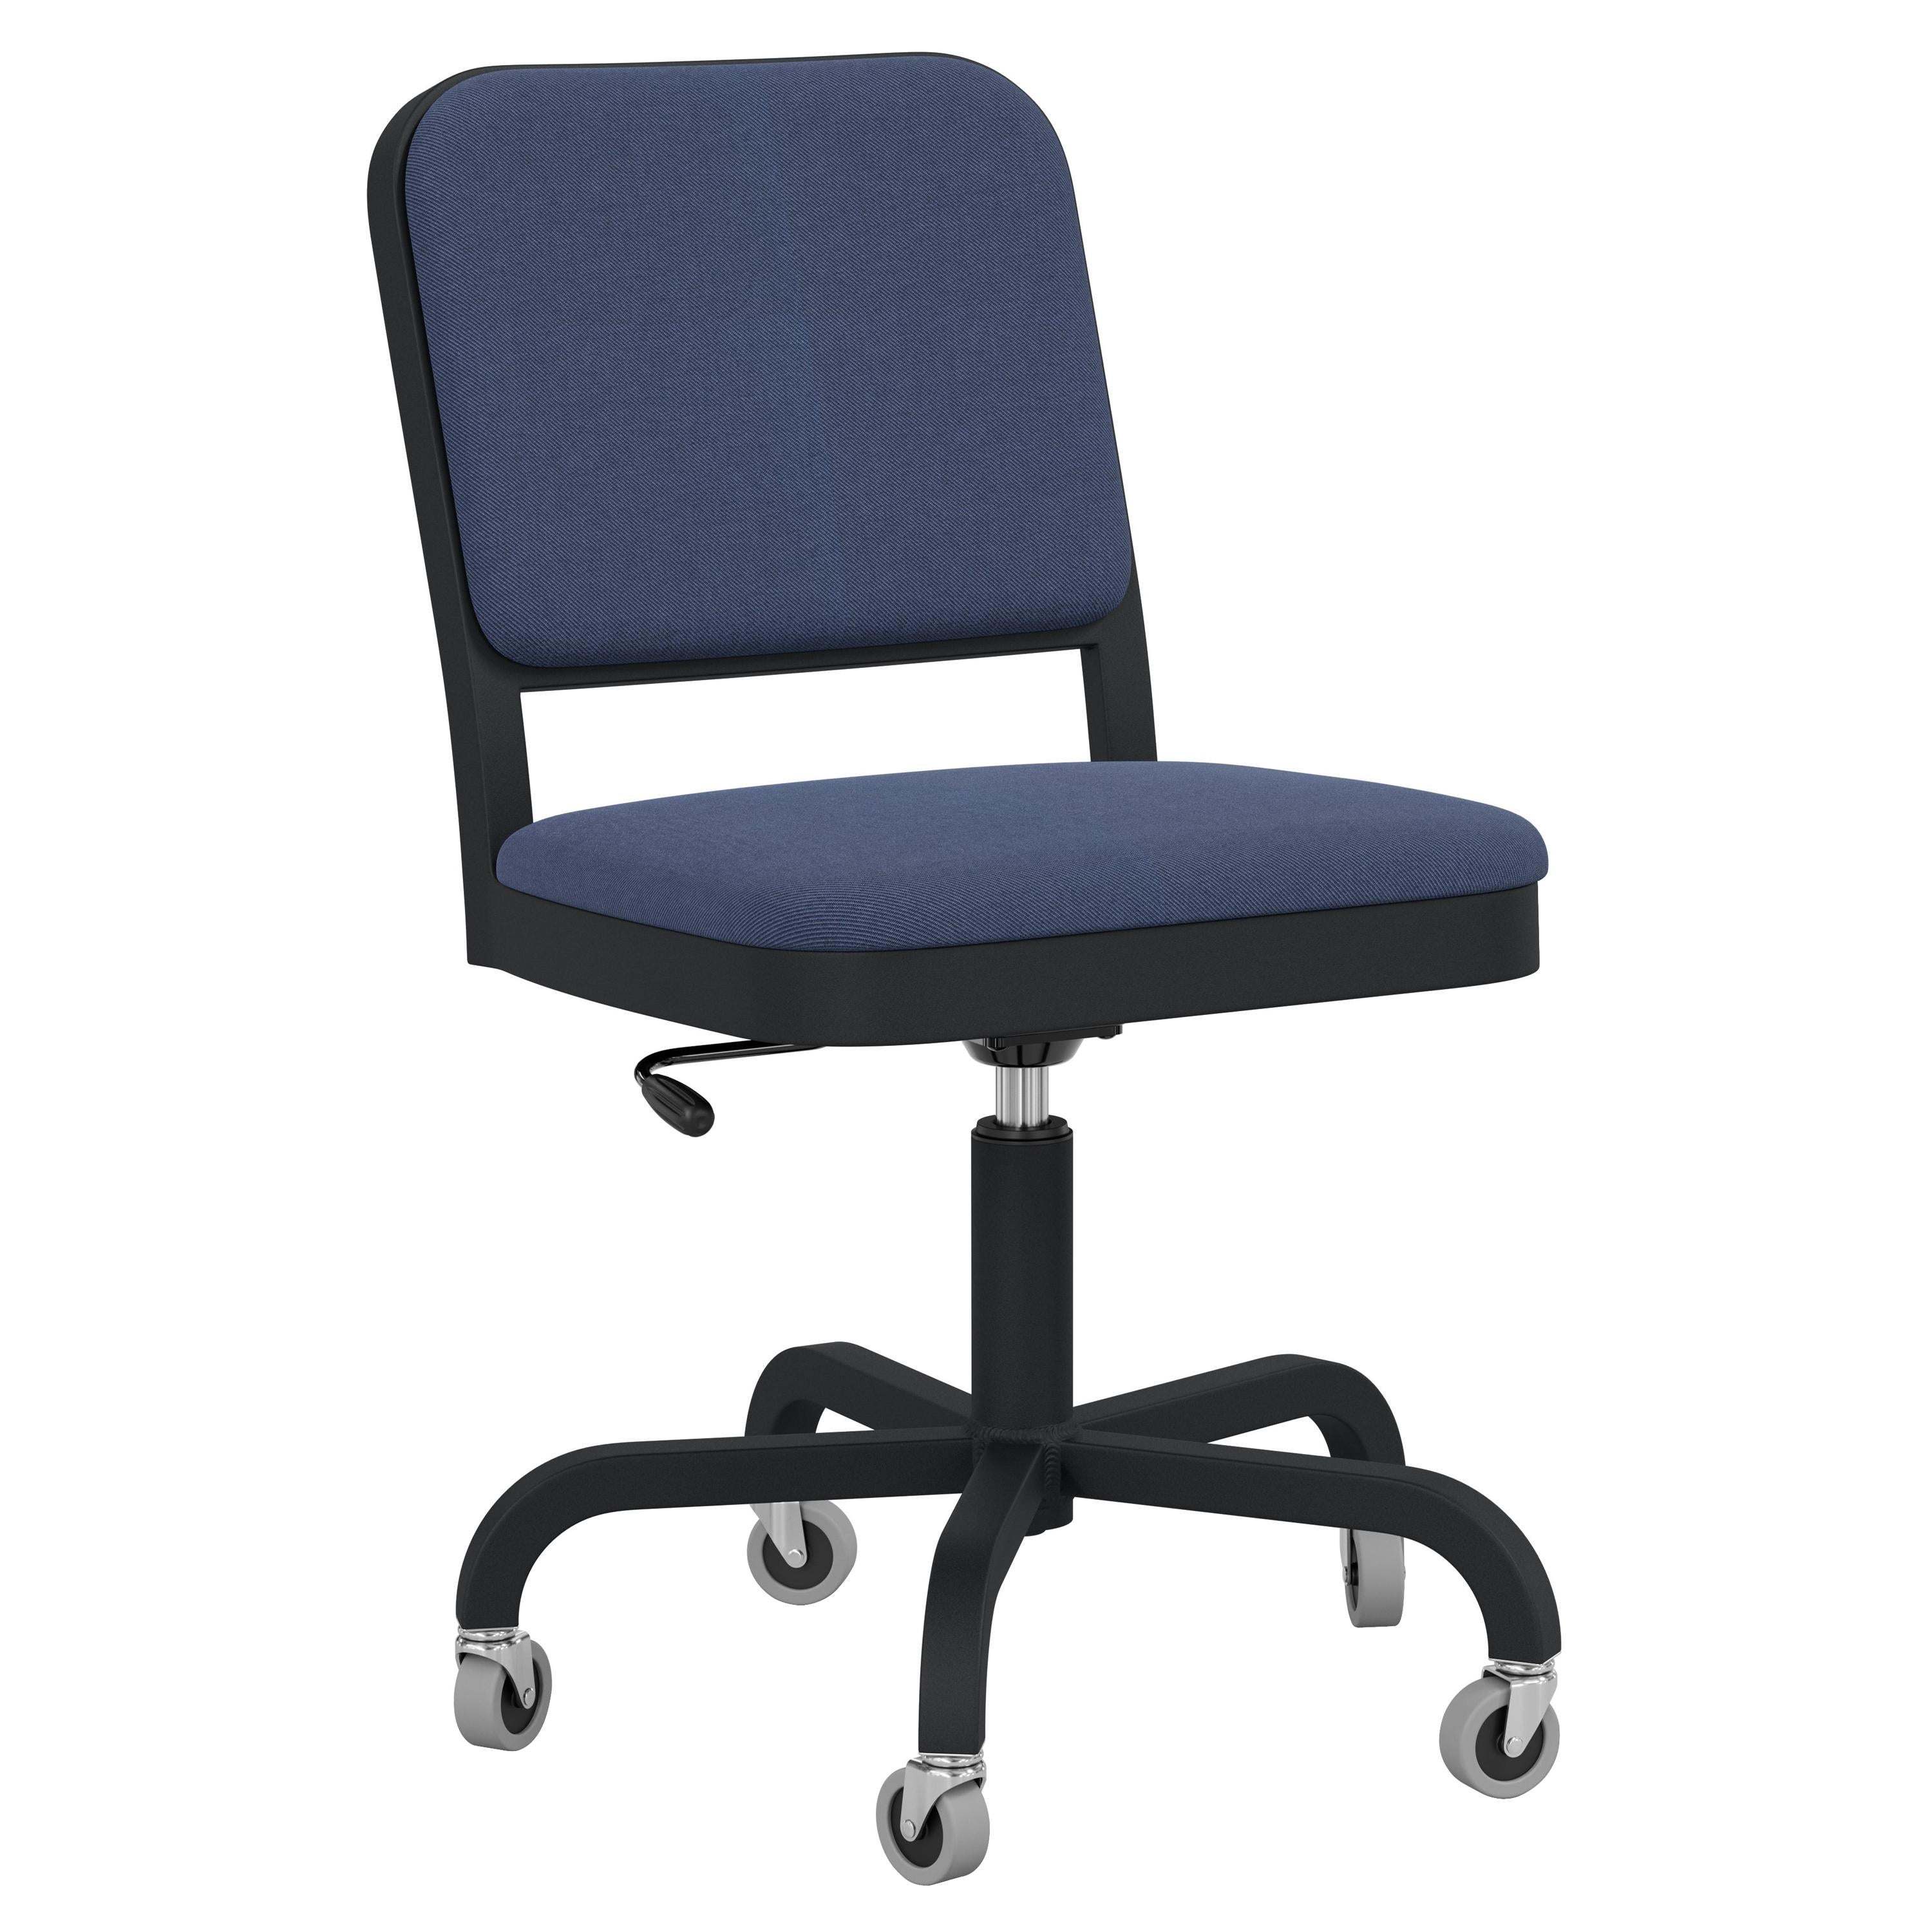 Emeco Navy Officer Swivel Chair in Navy Blue Fabric with Black Aluminum Frame For Sale